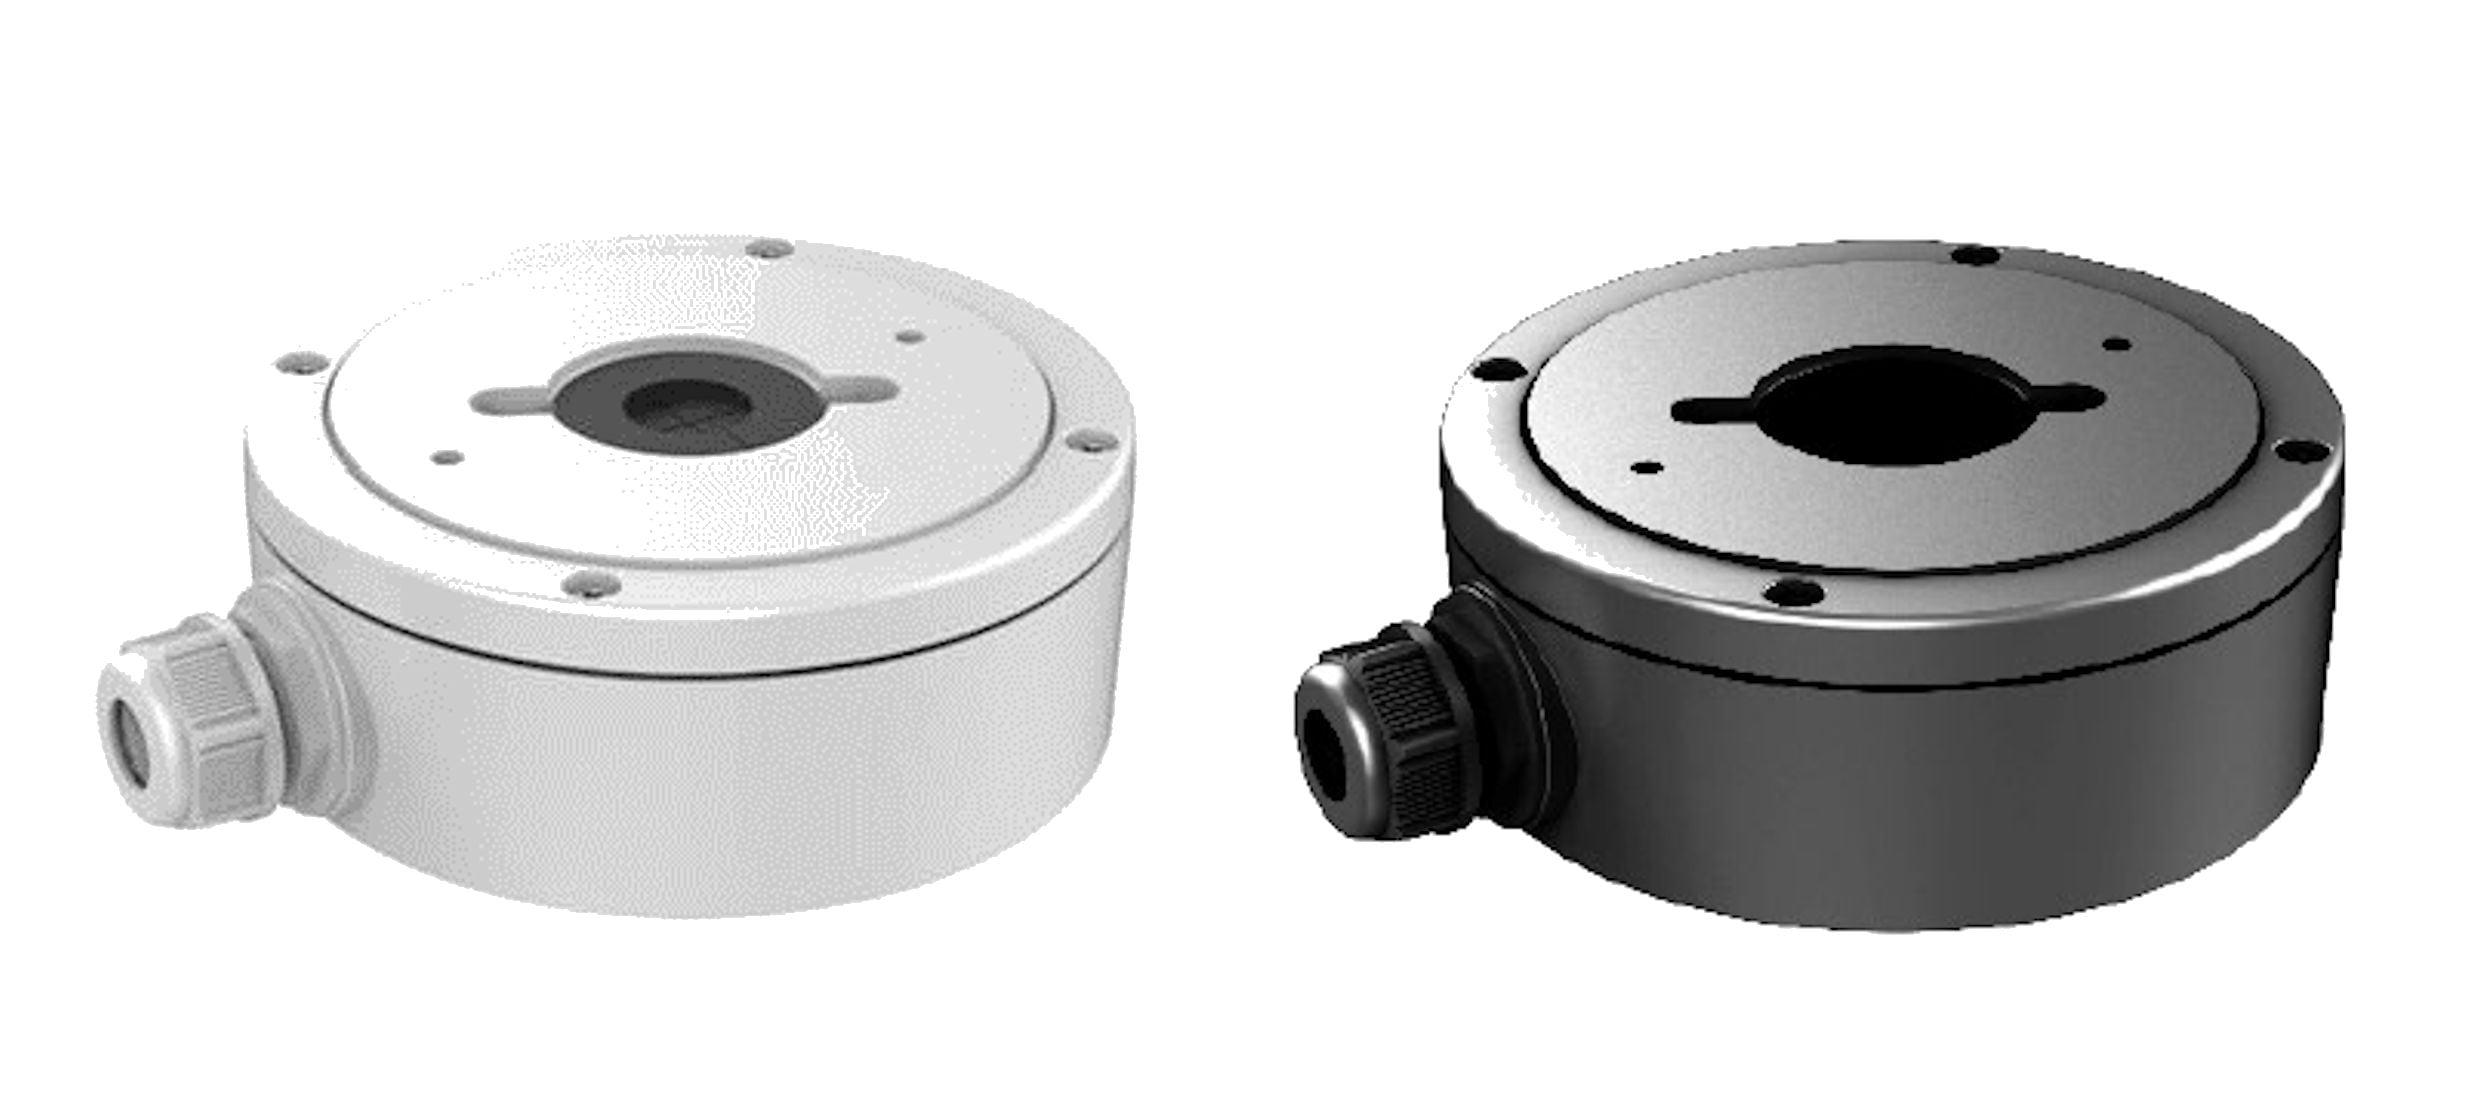 CBD-MINI is an aluminum junction box compatible with select Hikvision dome cameras.